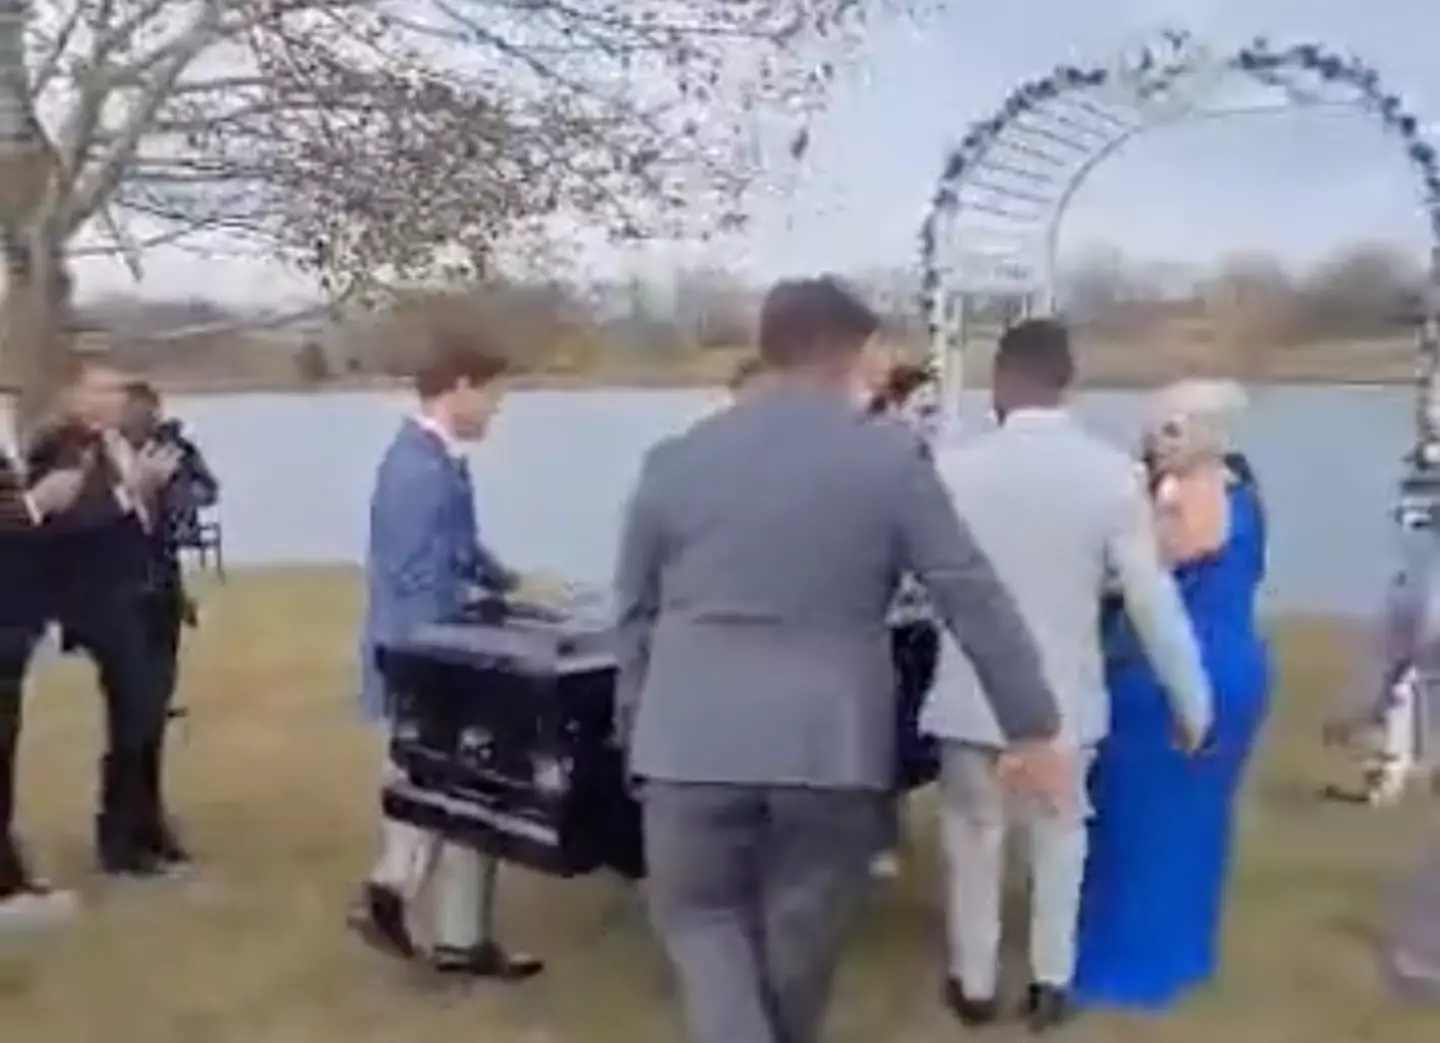 The groom was carried down the aisle in a coffin.